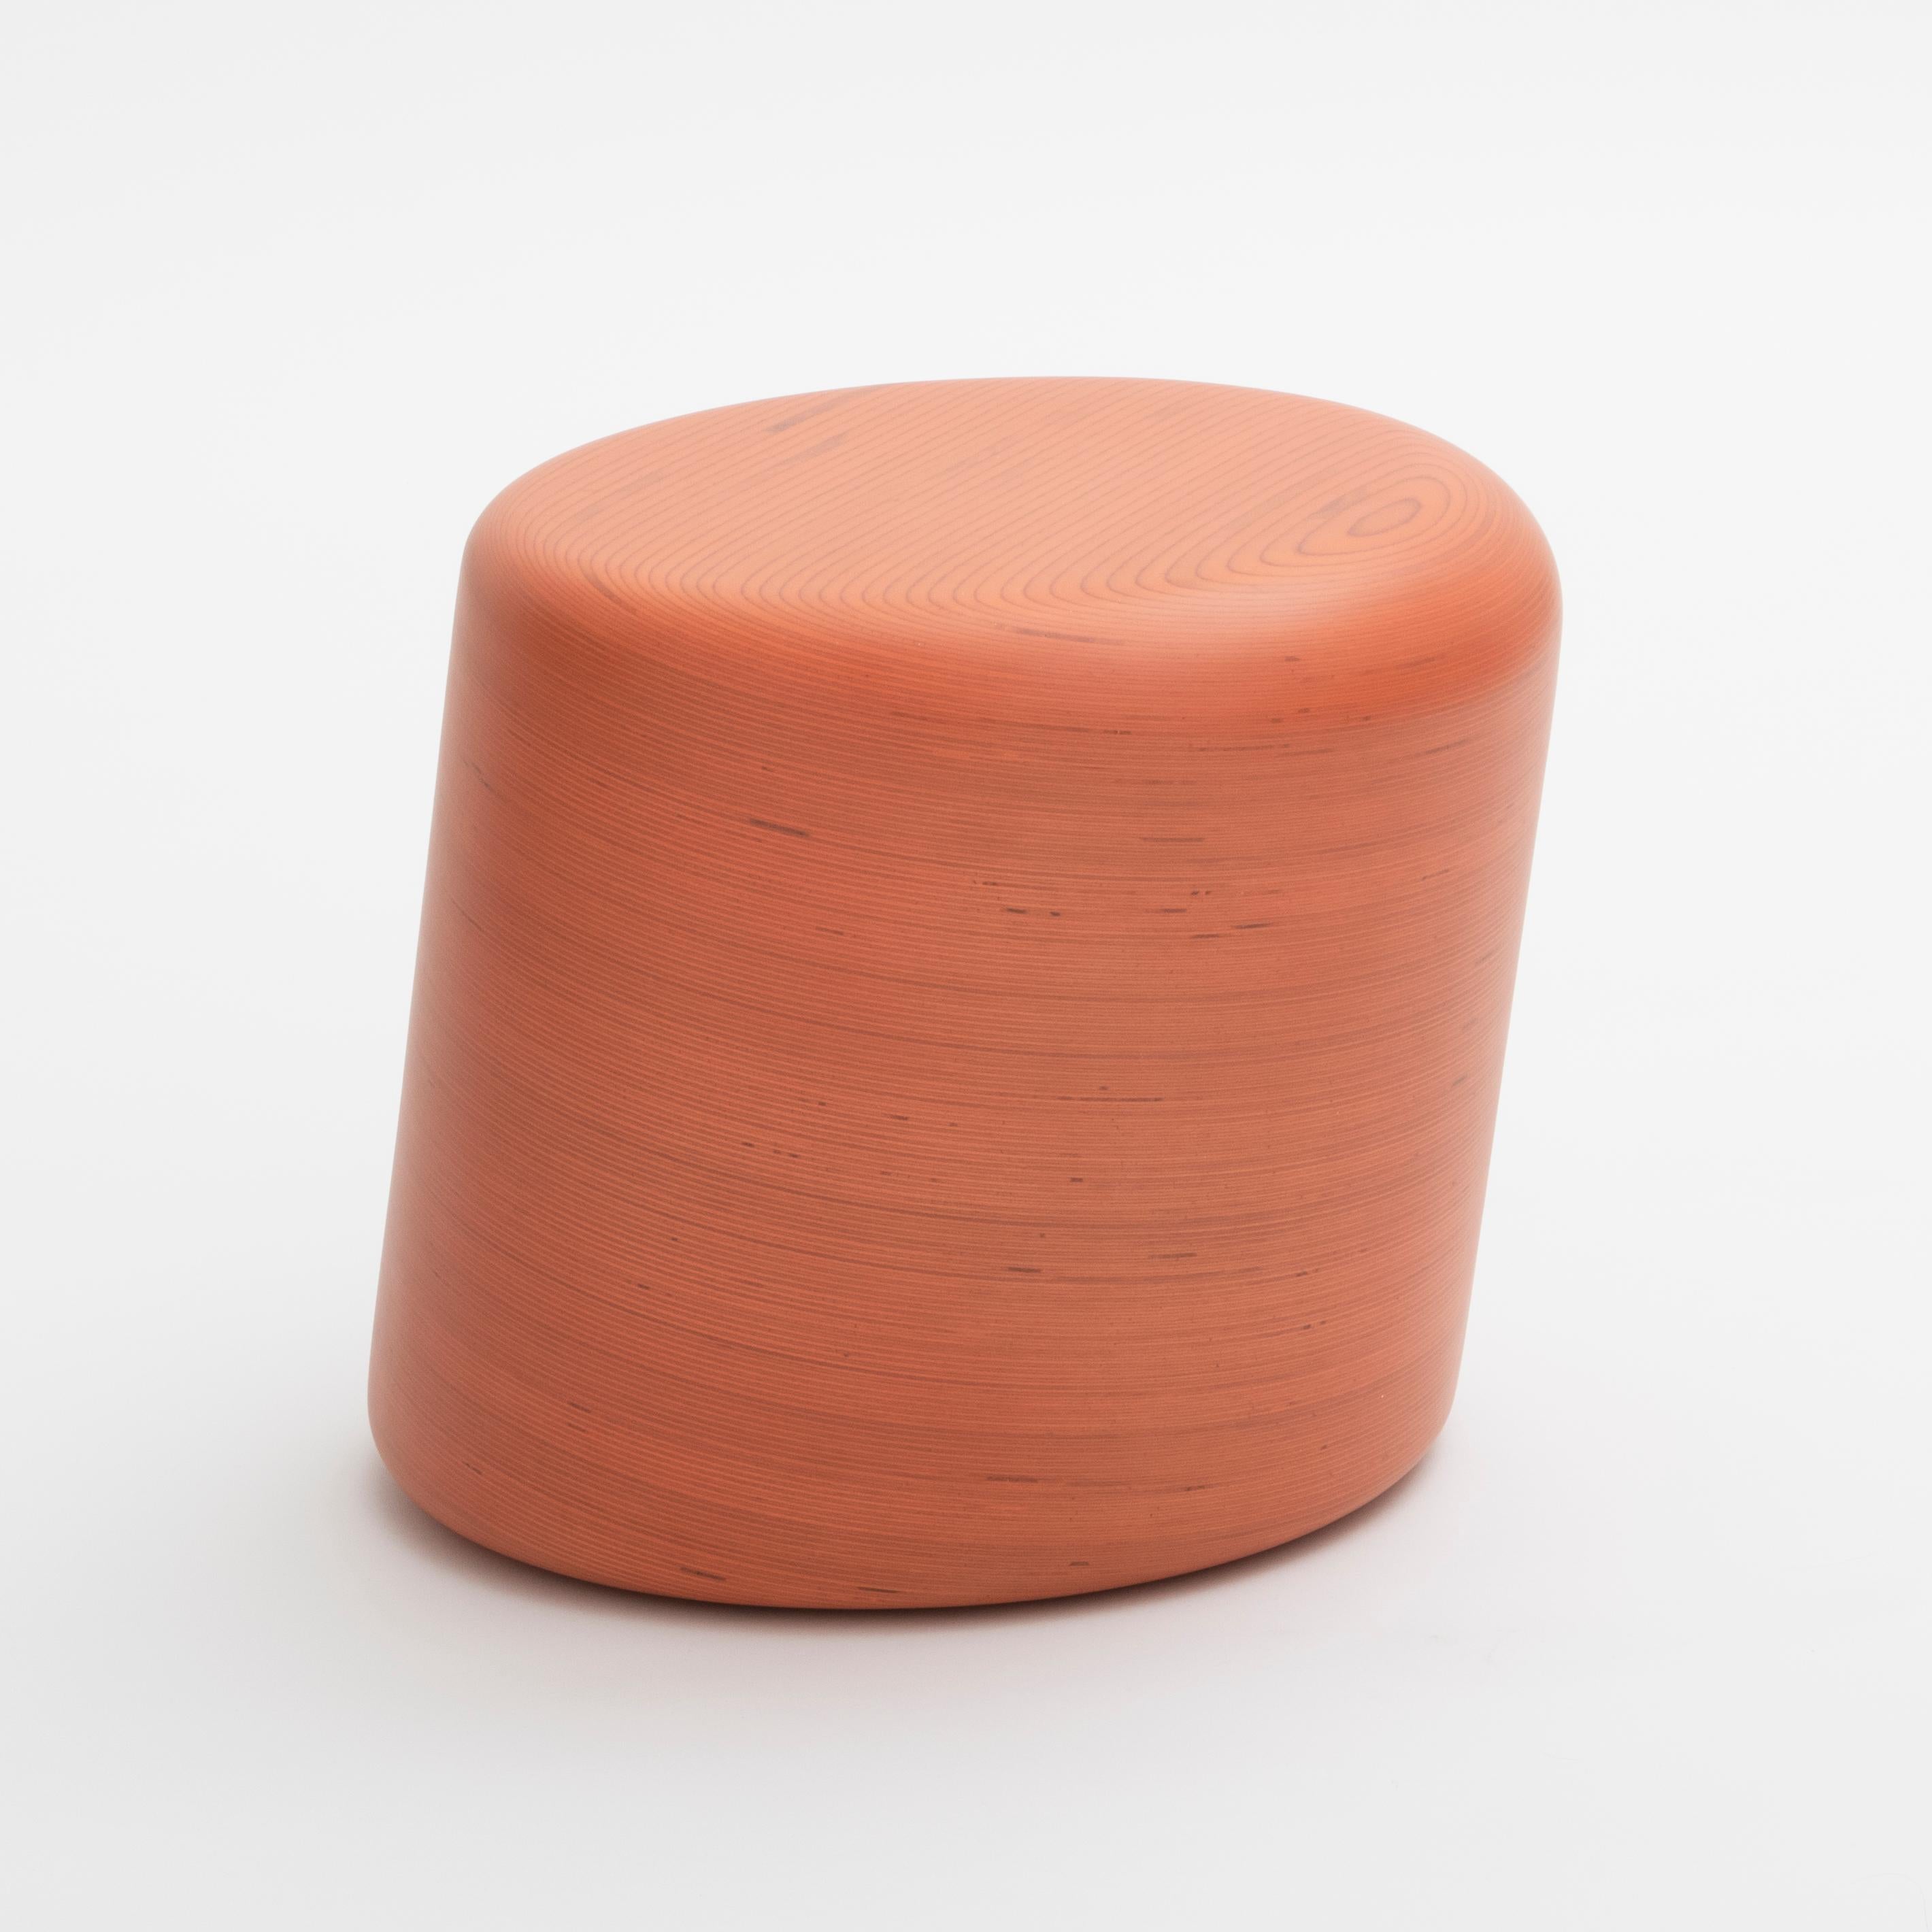 The Stack Stool. Equally suitable for use as a stool or accent side table, this piece expresses the essence of the Stack line. Stack laminated plywood in a pure cylindrical form with an ergonomic forward lean and a flat top with compound radiused